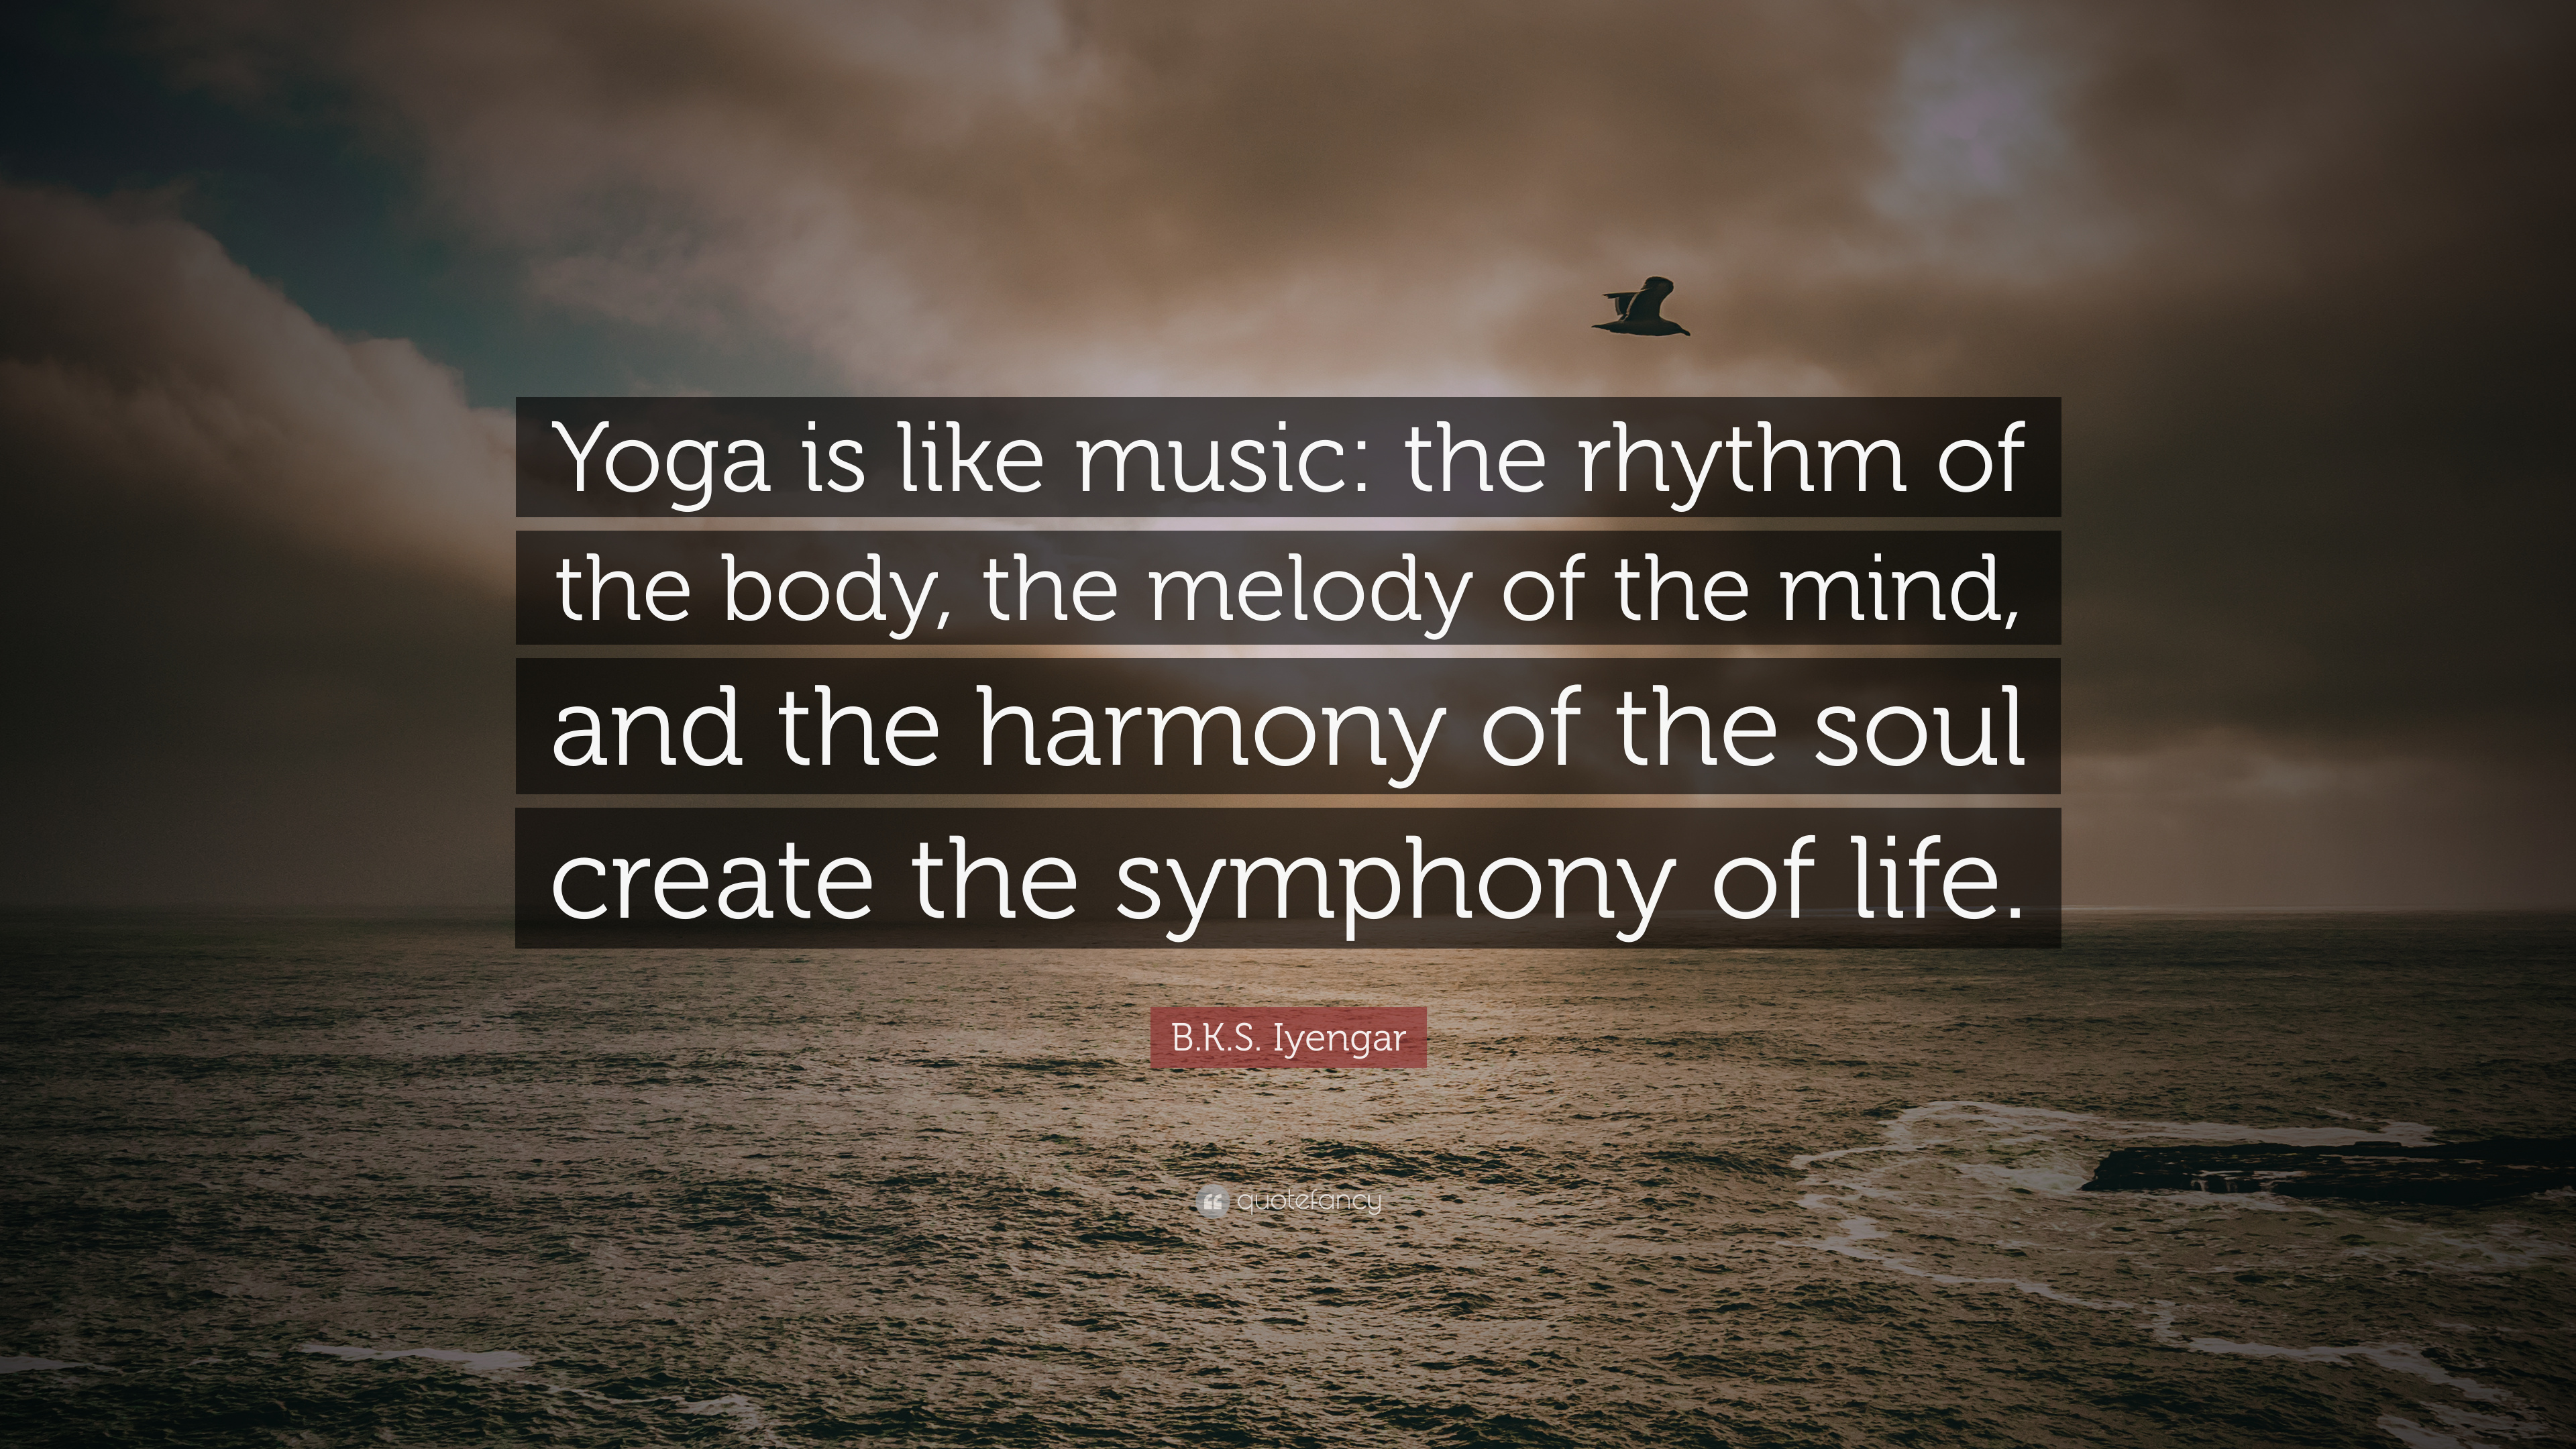 yoga is like music the rhythm of the body the melody of the mind and the harmony of the soul create the symphony of life